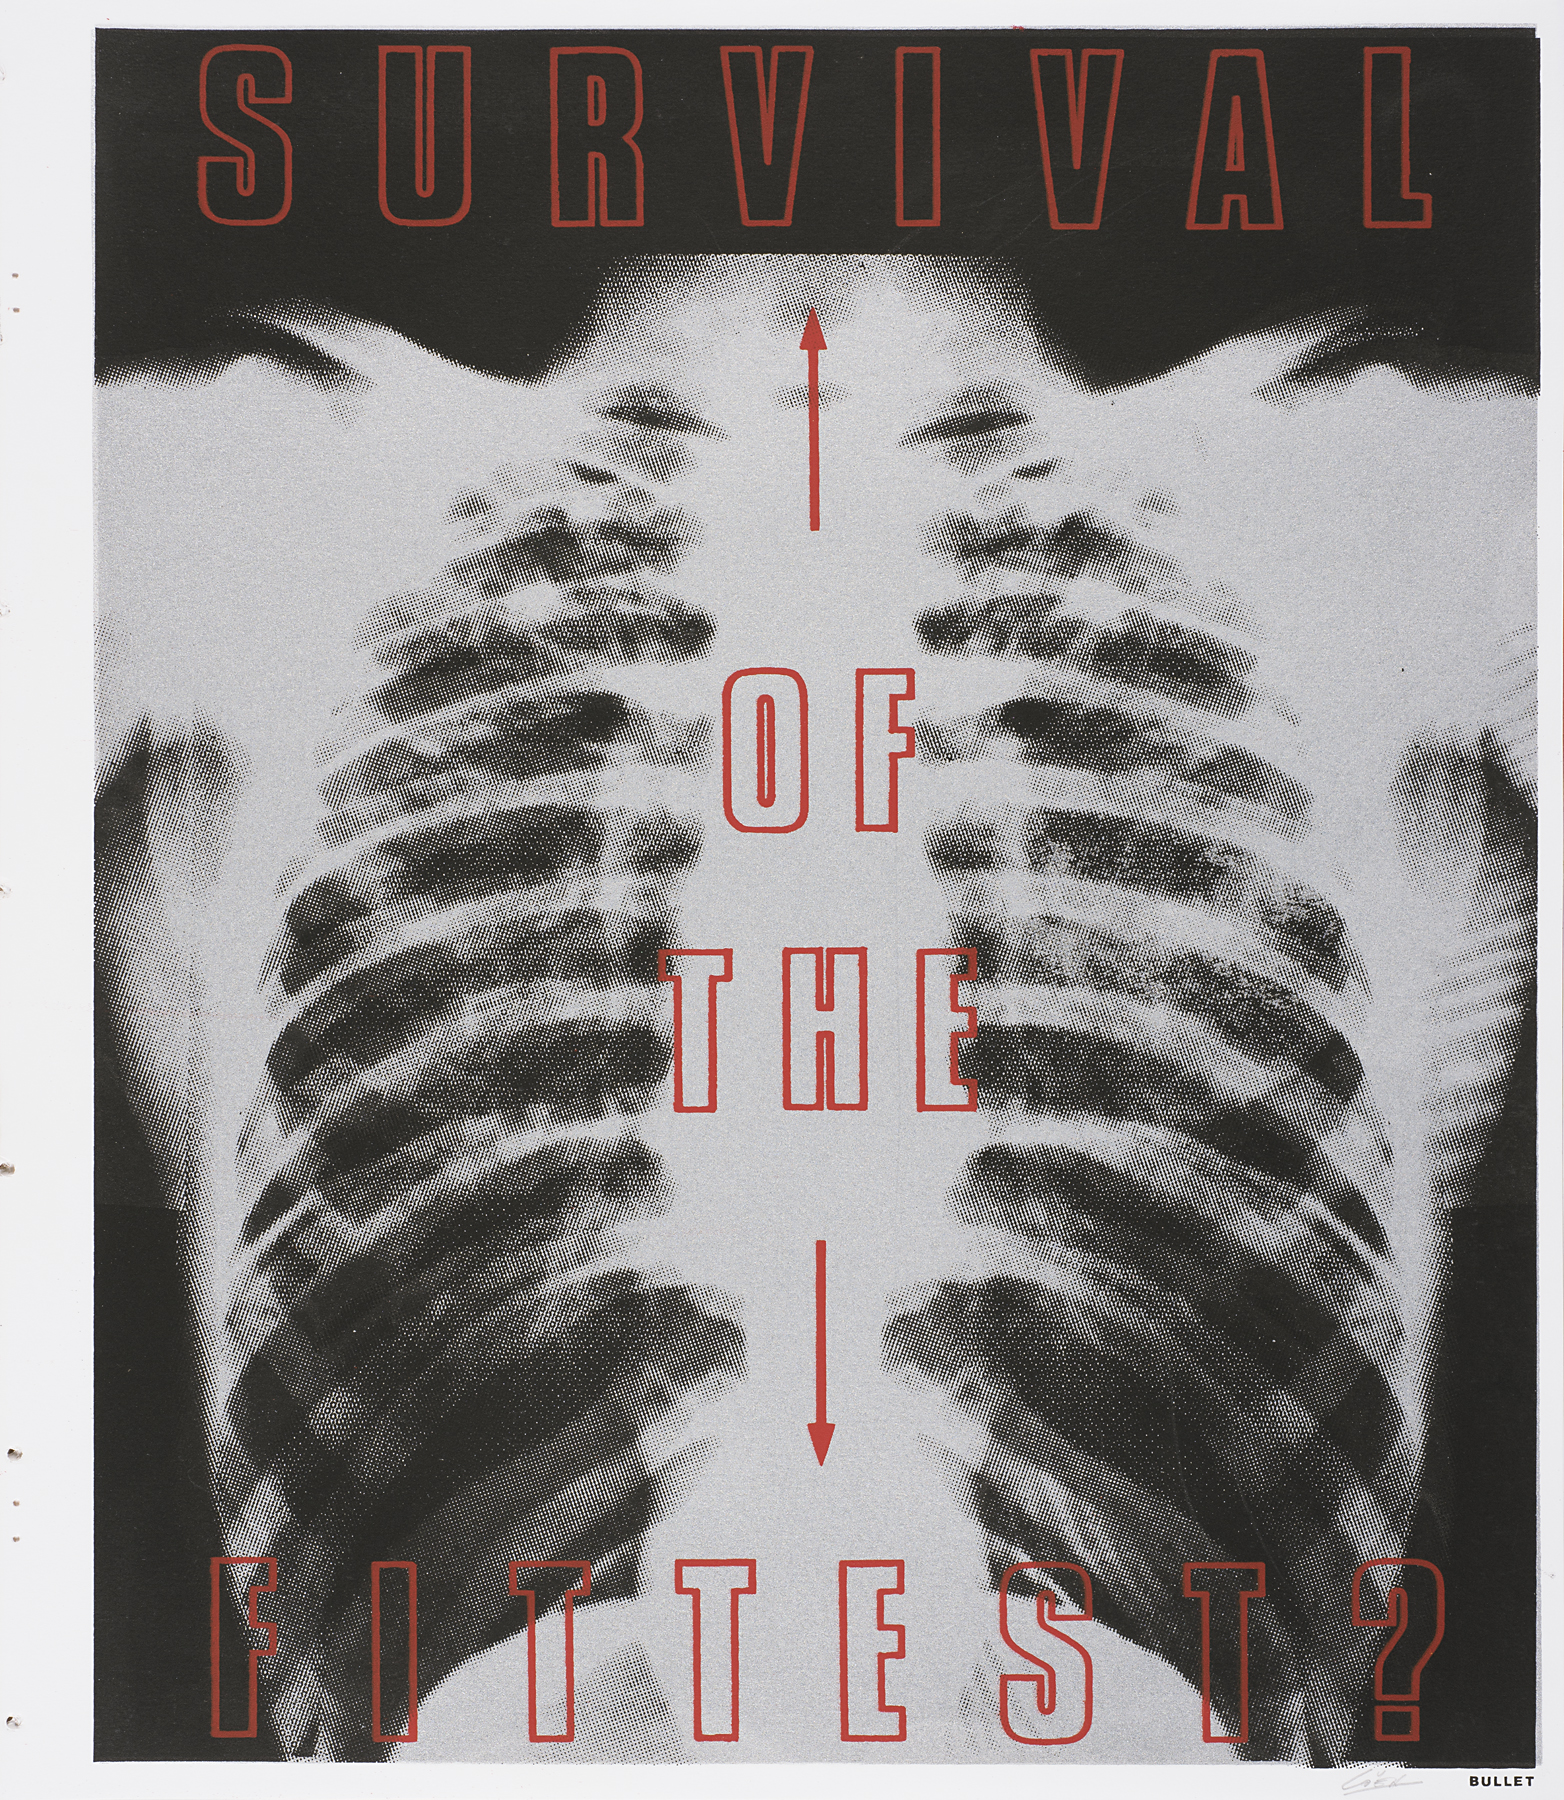 A grainy image of a white chest x-ray is printed on a black background. Over the x-ray is the word “SURVIVAL” followed by a red arrow pointing upward, then the words “OF THE” followed by a red arrow pointing downward, and at the bottom of the print, the word “FITTEST” with a question mark in a red outline. 